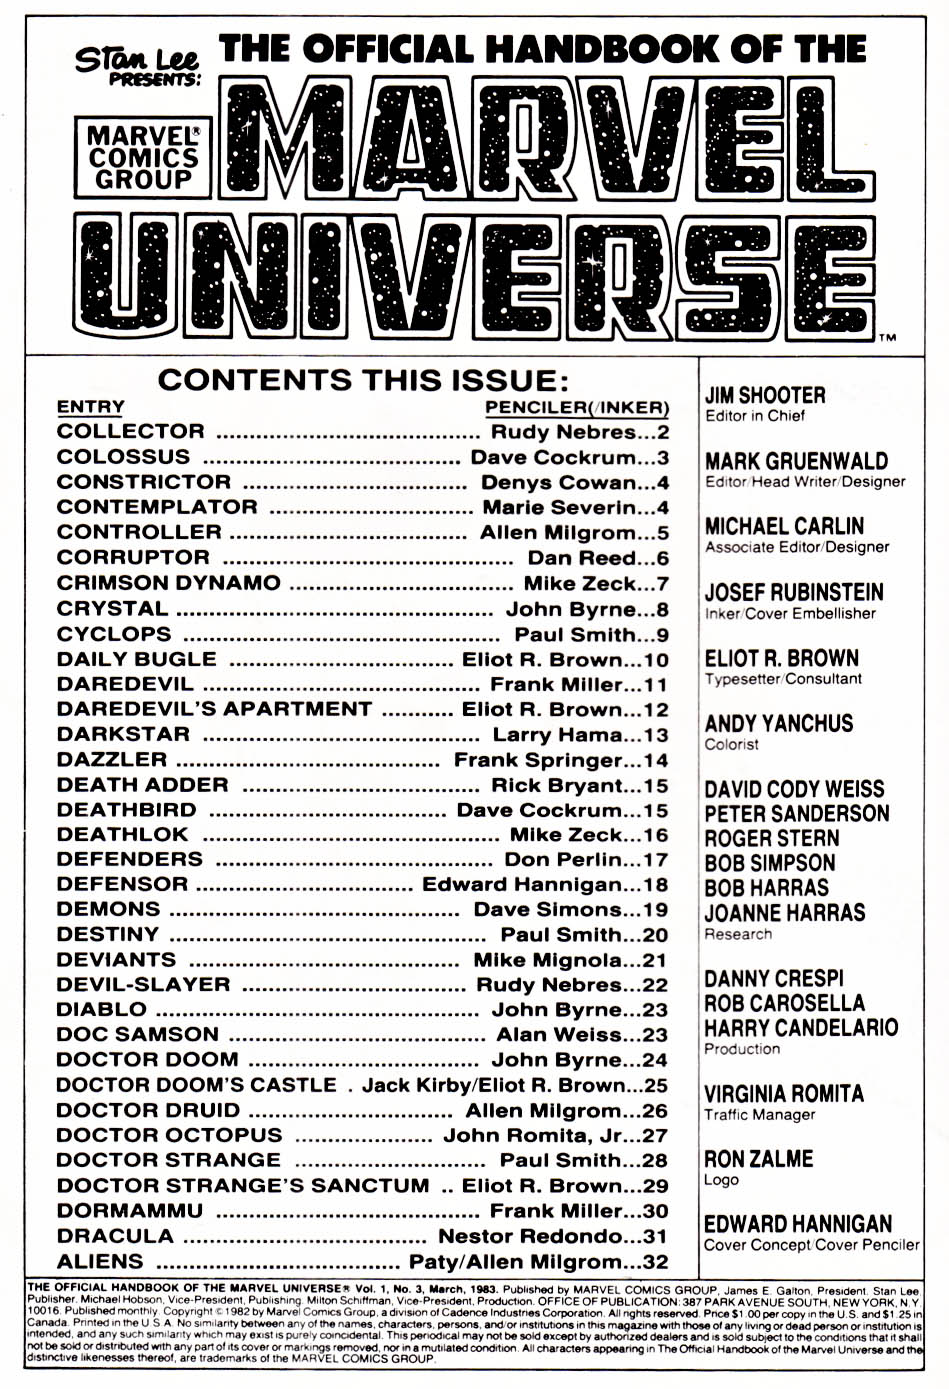 Read online The Official Handbook of the Marvel Universe comic -  Issue #3 - 2